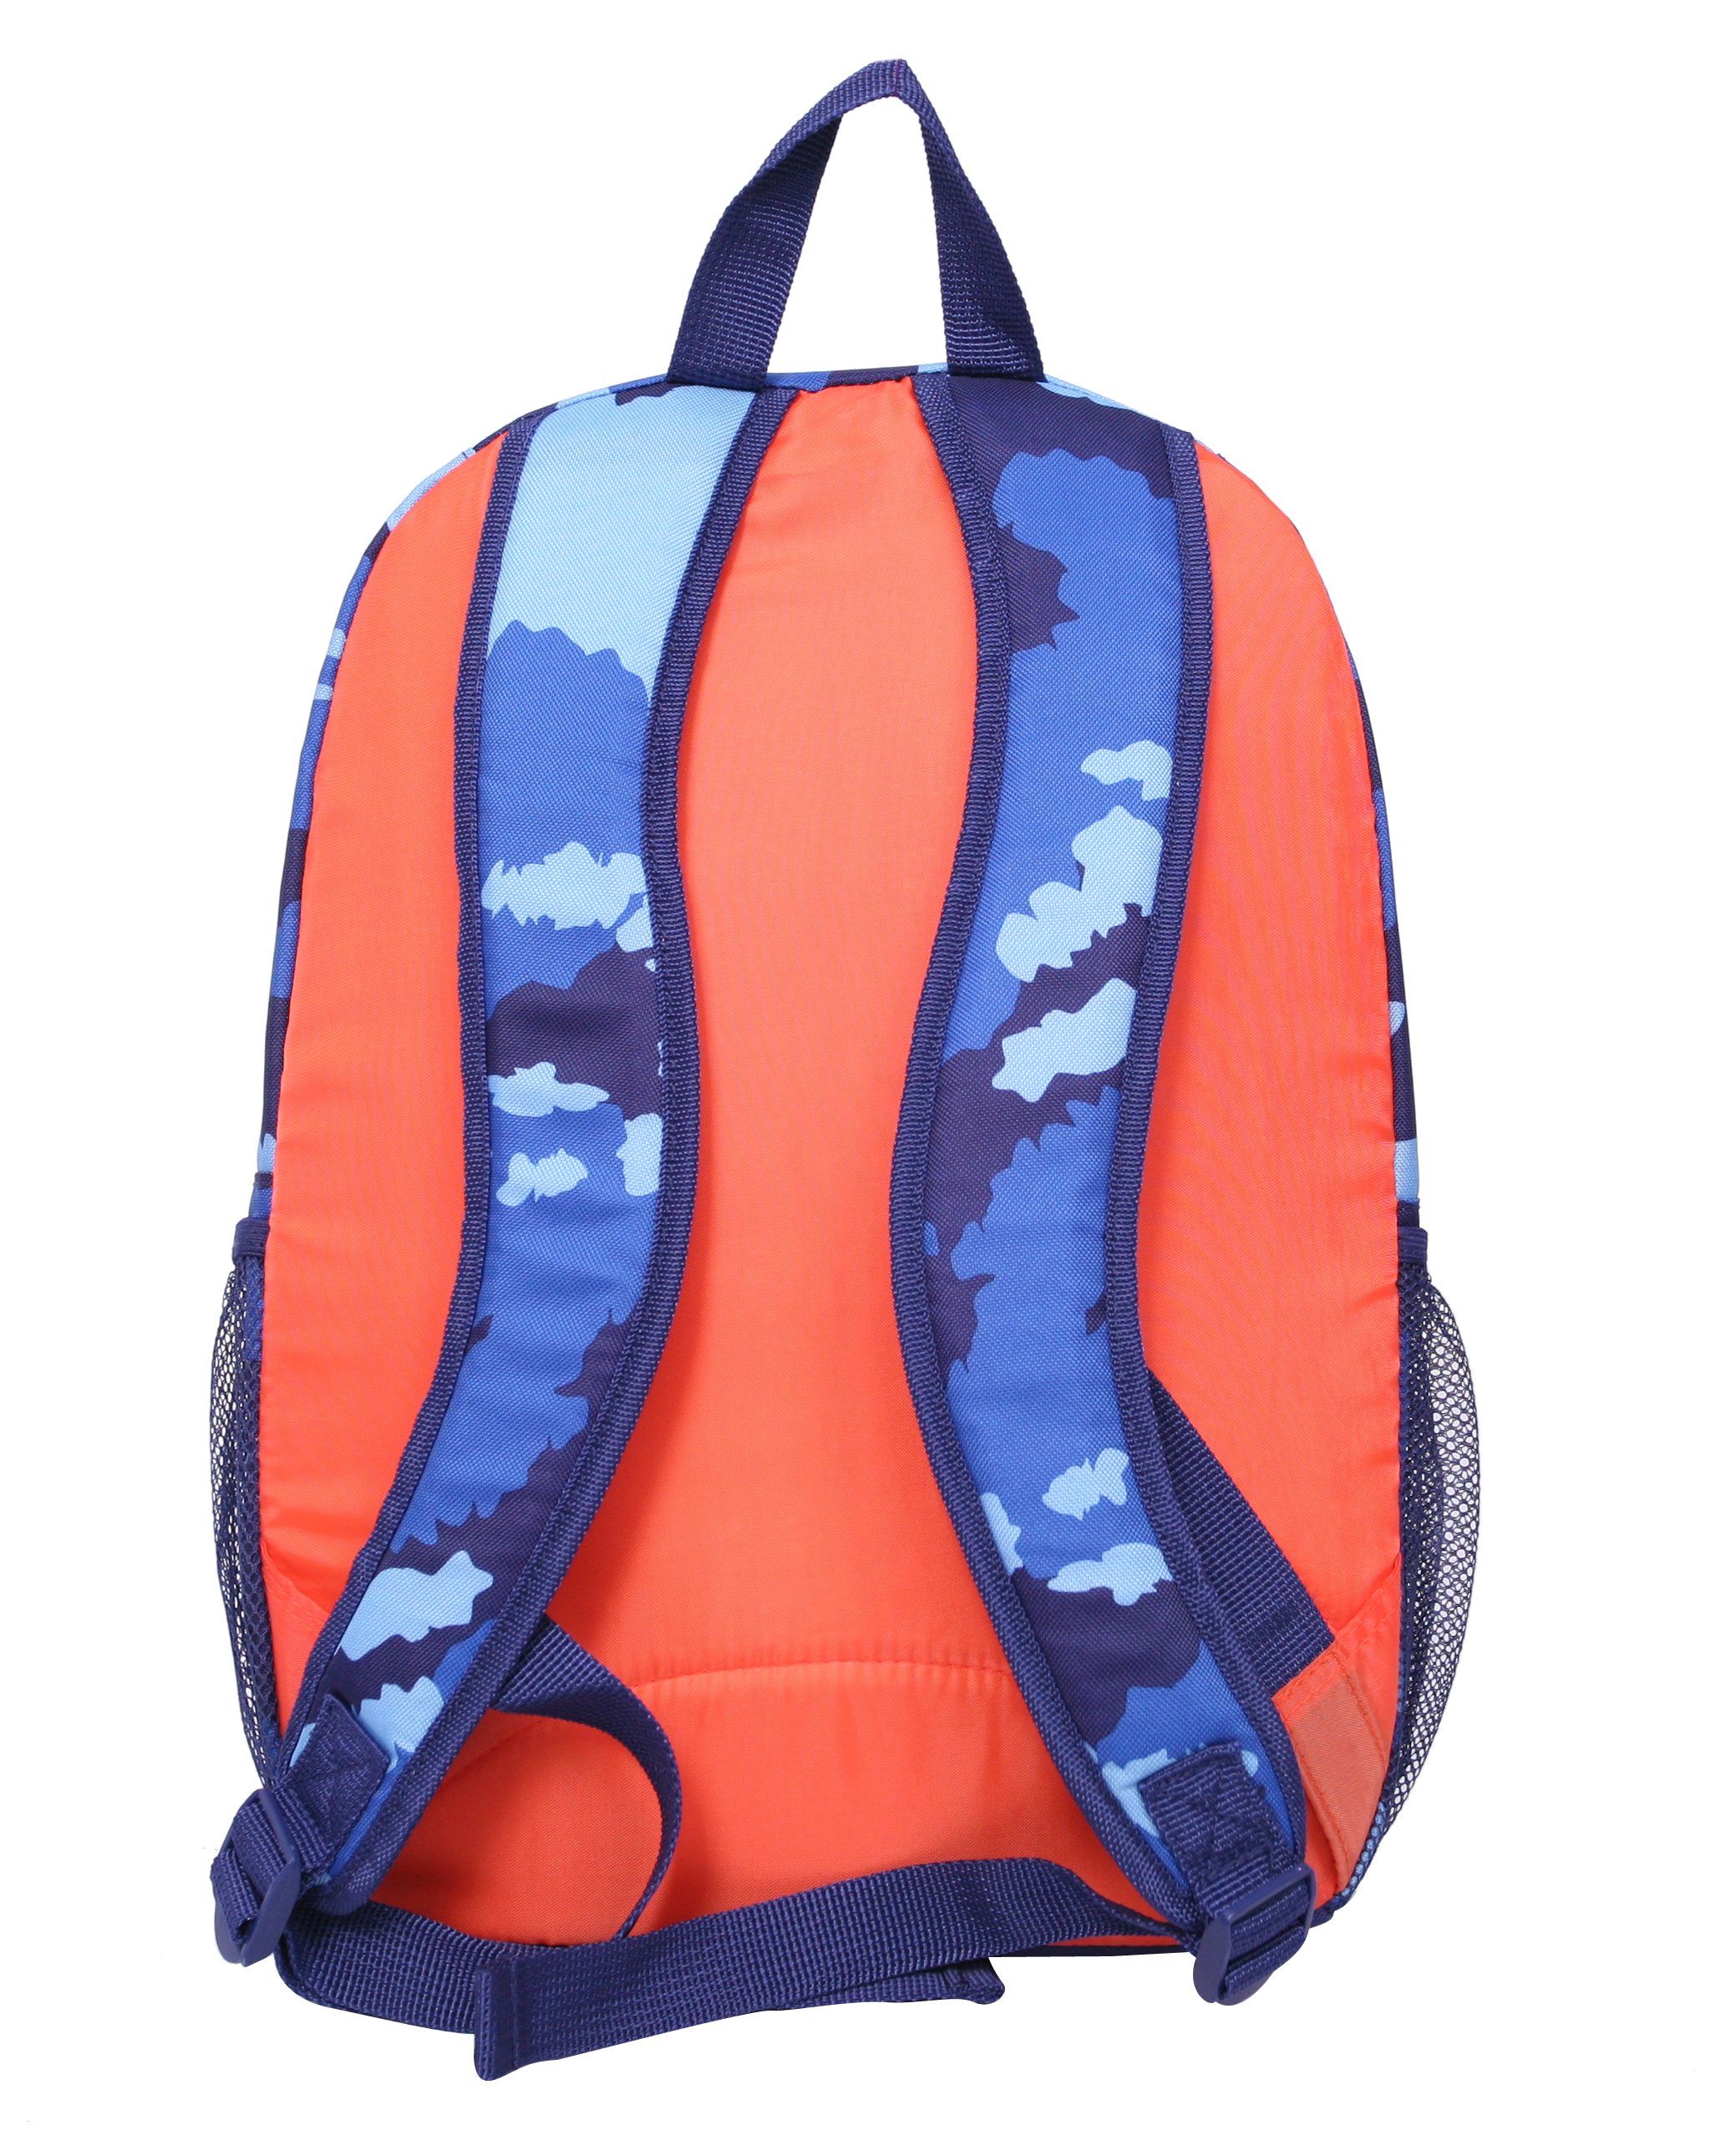 Crckt Kids Boys 15" School Backpack with Plush Dangle, Blue Camo Print - image 4 of 8